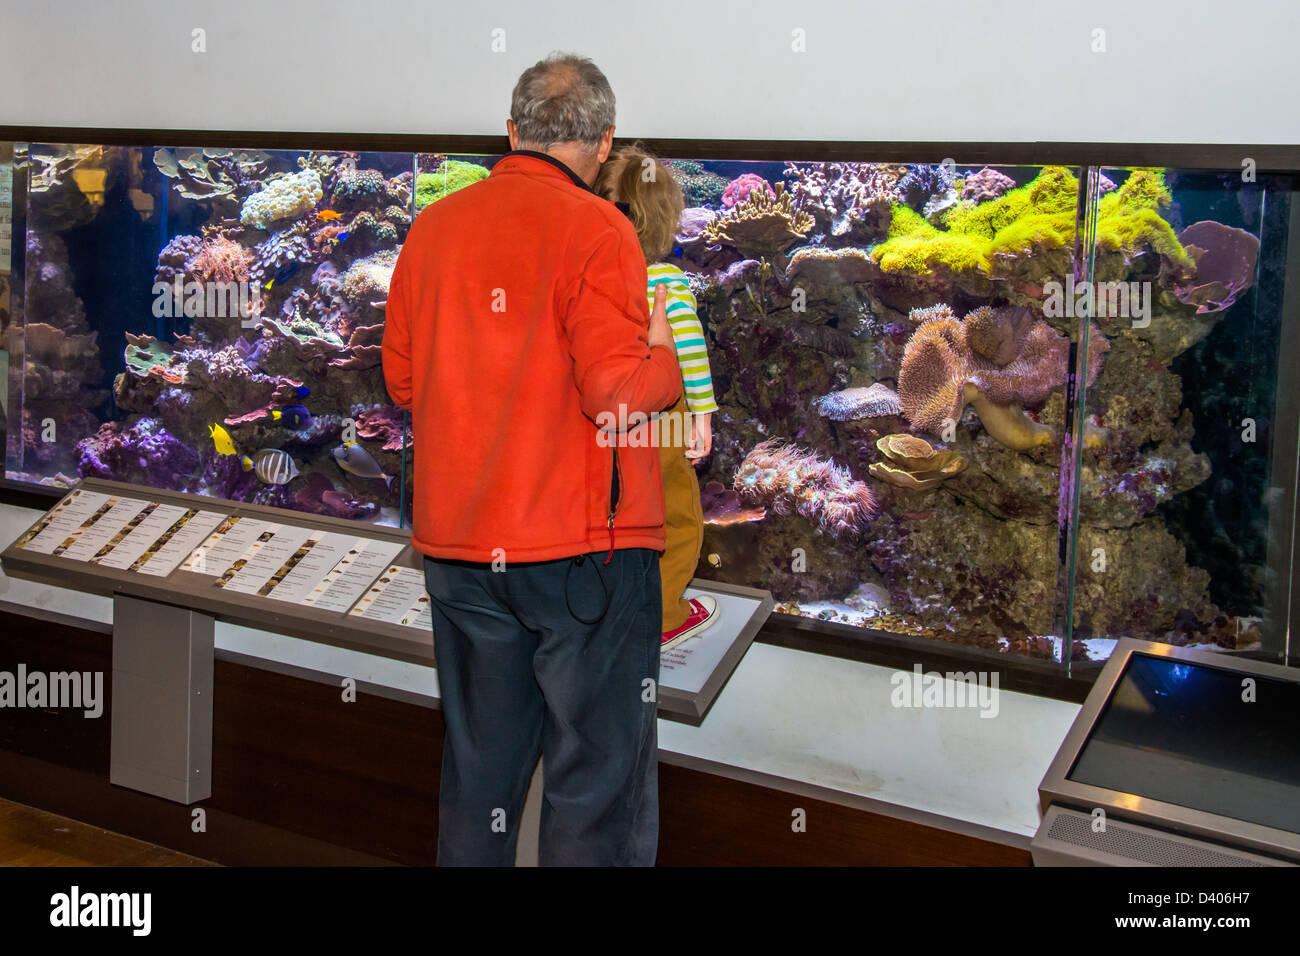 Man and child looking into a large marine aquarium at the Royal Ontario Museum, Toronto, Canada. Stock Photo